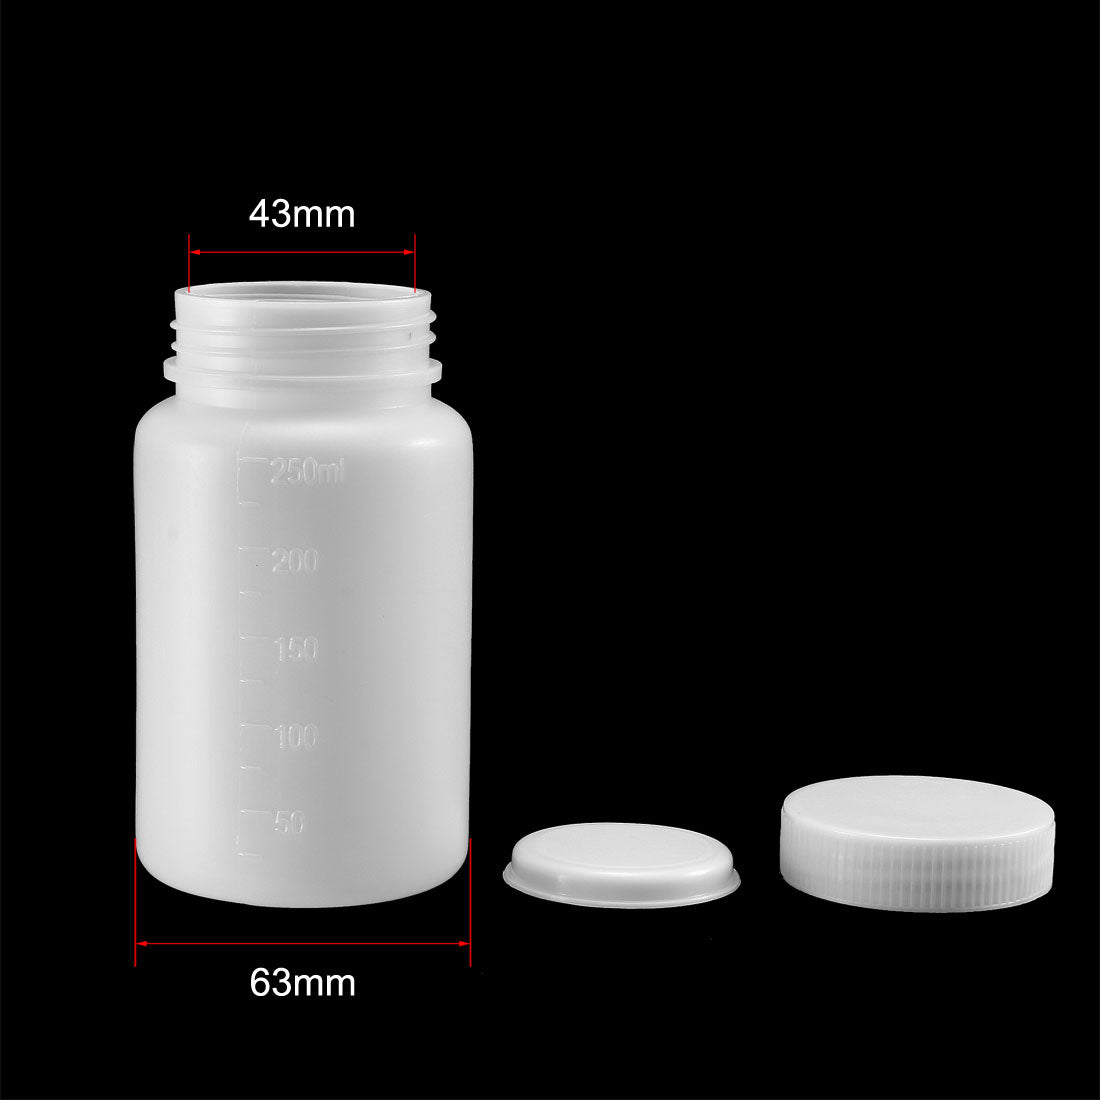 uxcell Uxcell Plastic Lab Chemical Reagent Bottle 250ml/8.5oz Wide Mouth Sample Sealing Liquid Storage Container 2pcs